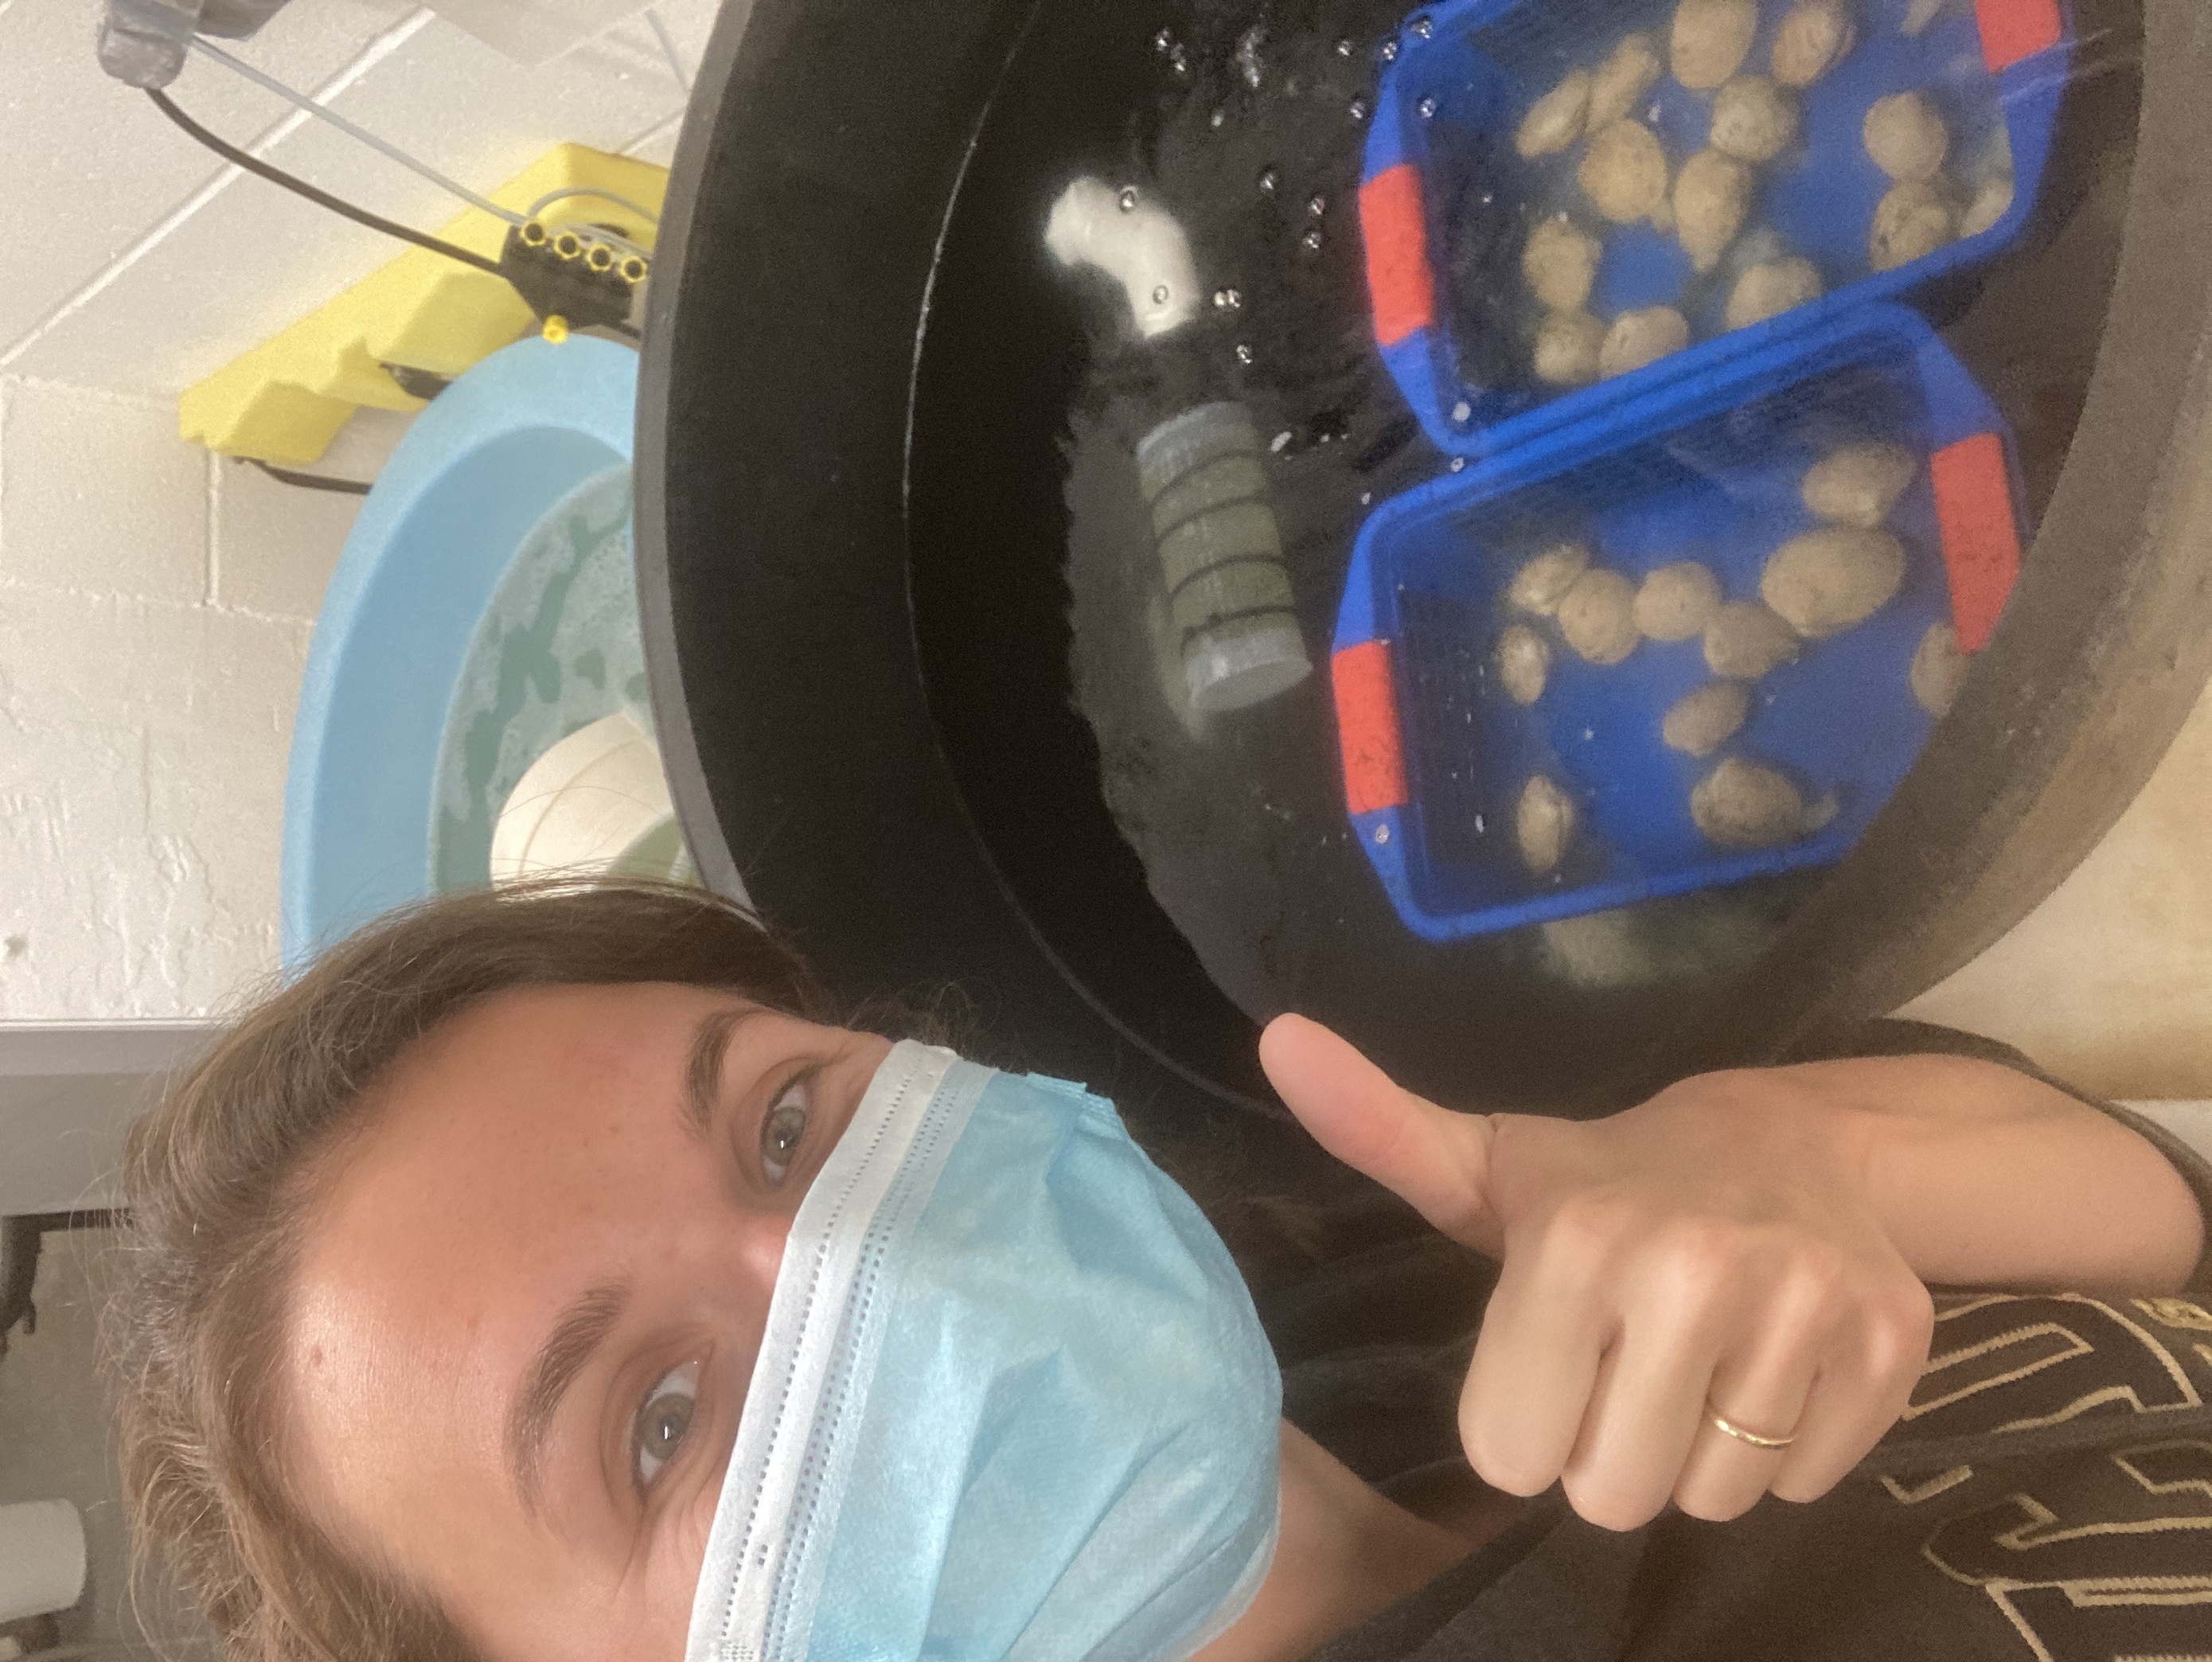 Hannah Kempf is wearing a mask and giving a thumbs up as she poses next to Pacific clams